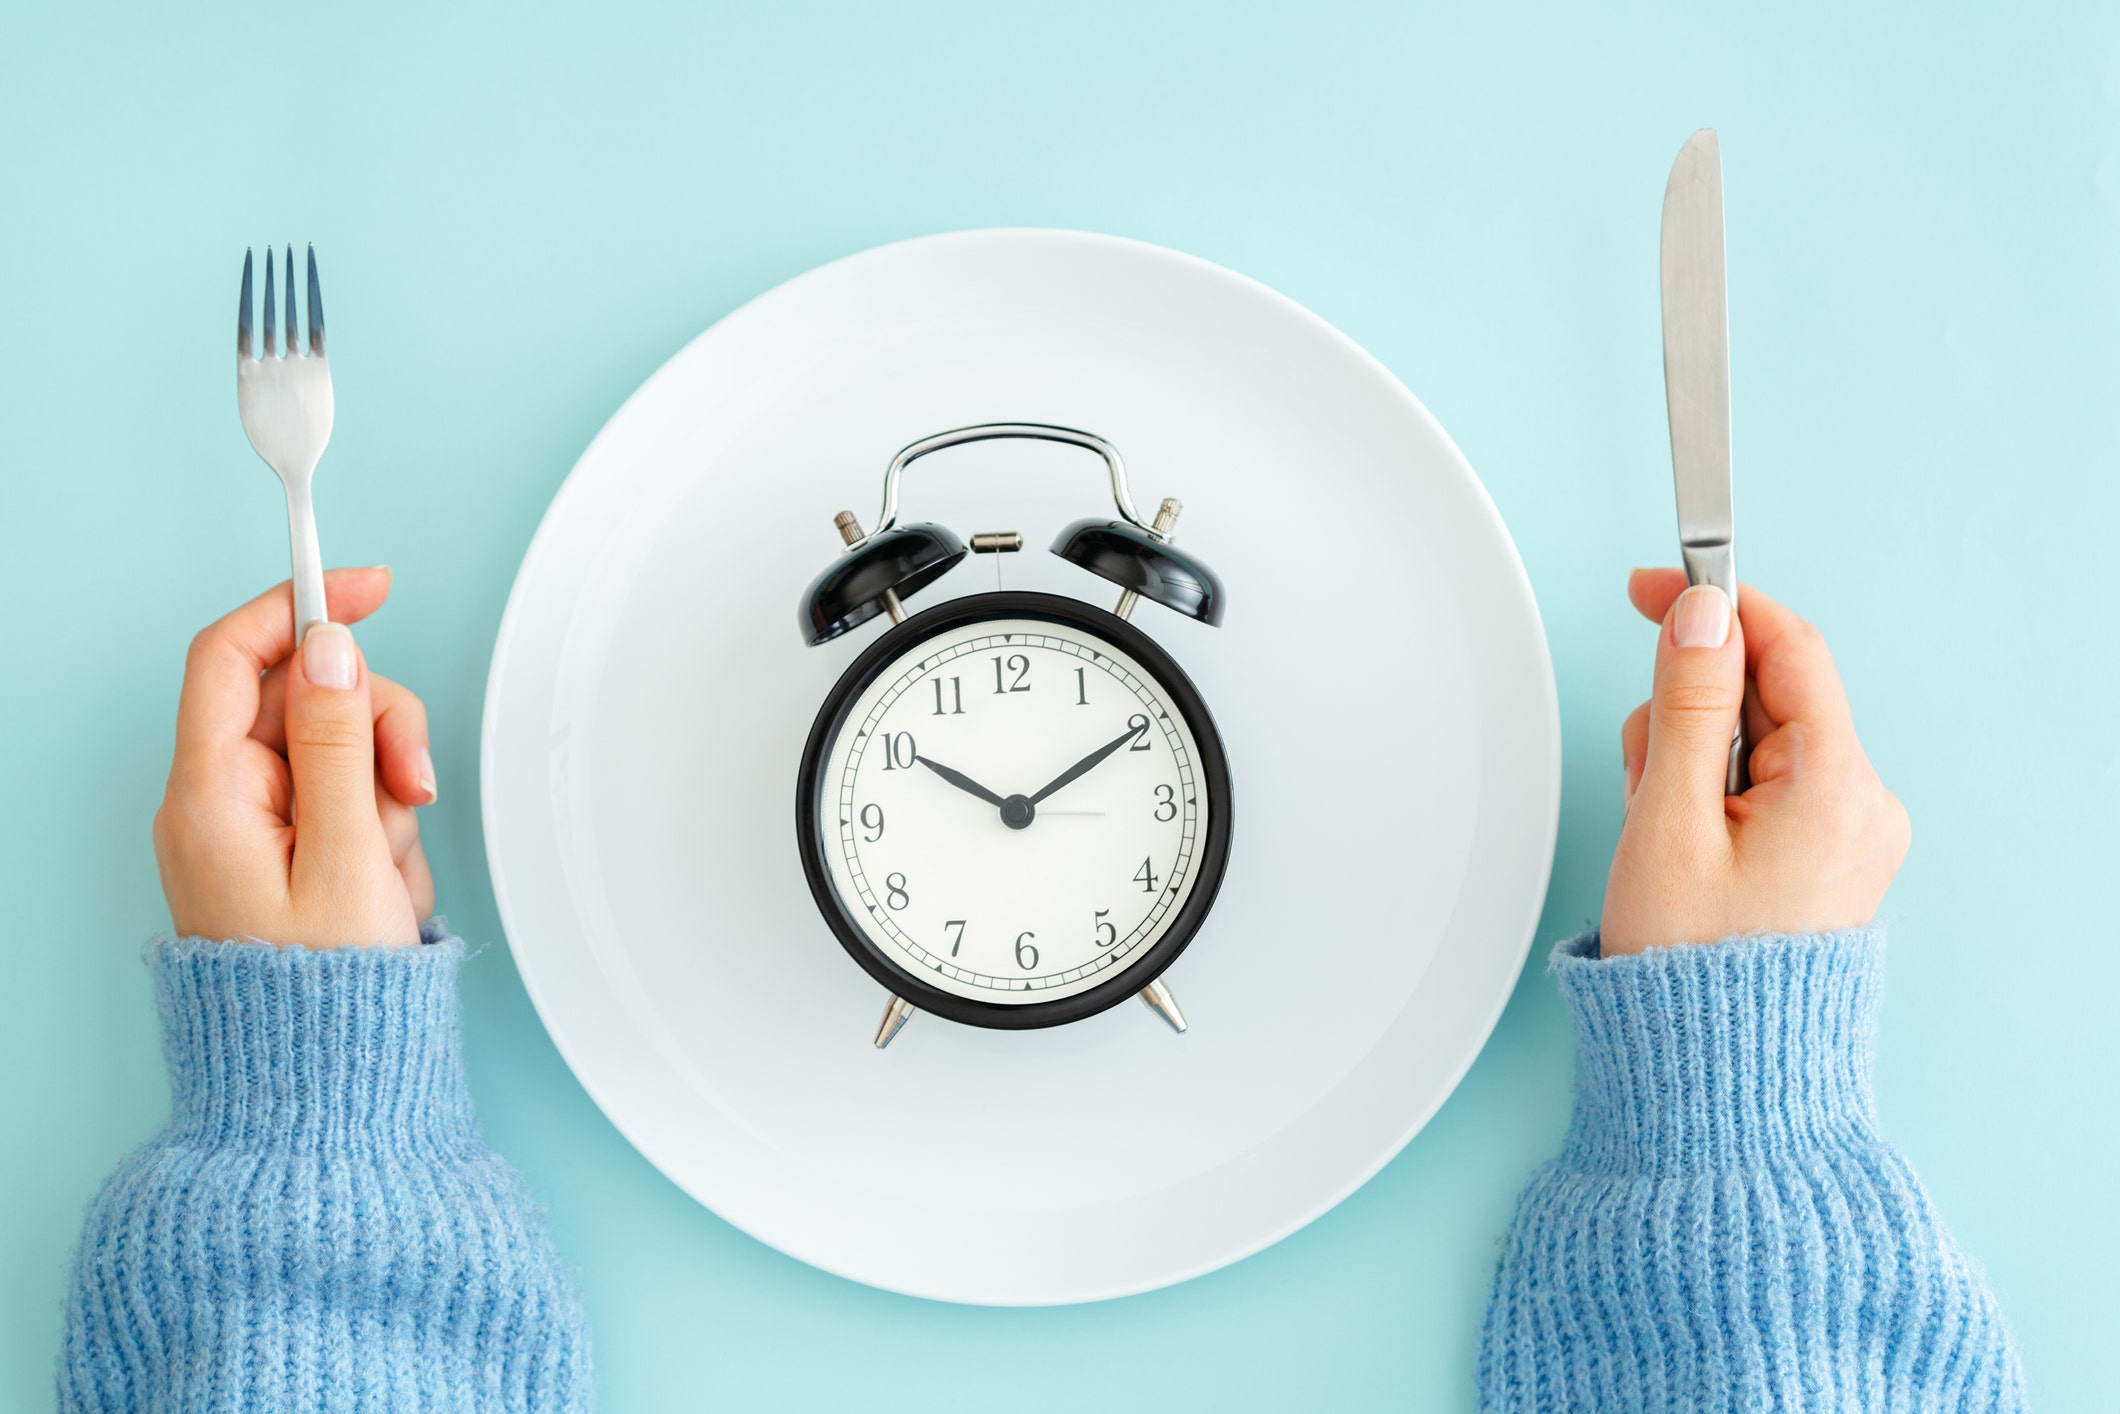 Intermittent fasting may cause muscle loss more than weight loss, study says - Fox News